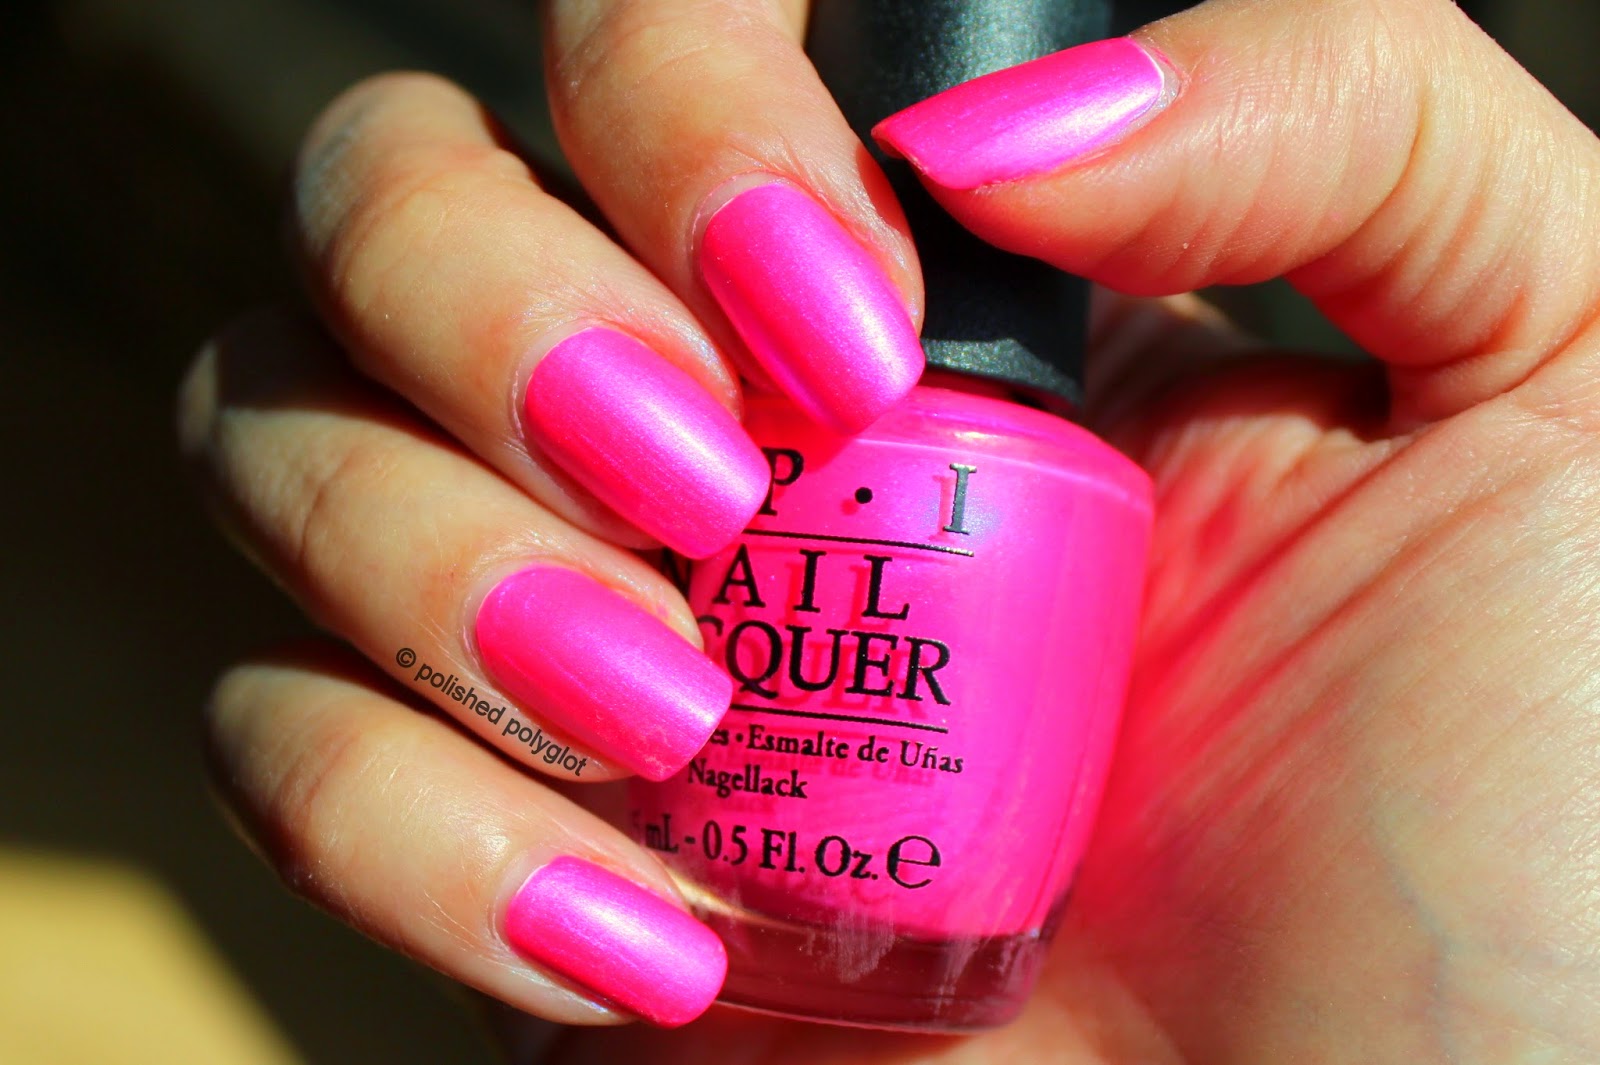 OPI Nail Lacquer in "Hotter Than You Pink" - wide 5